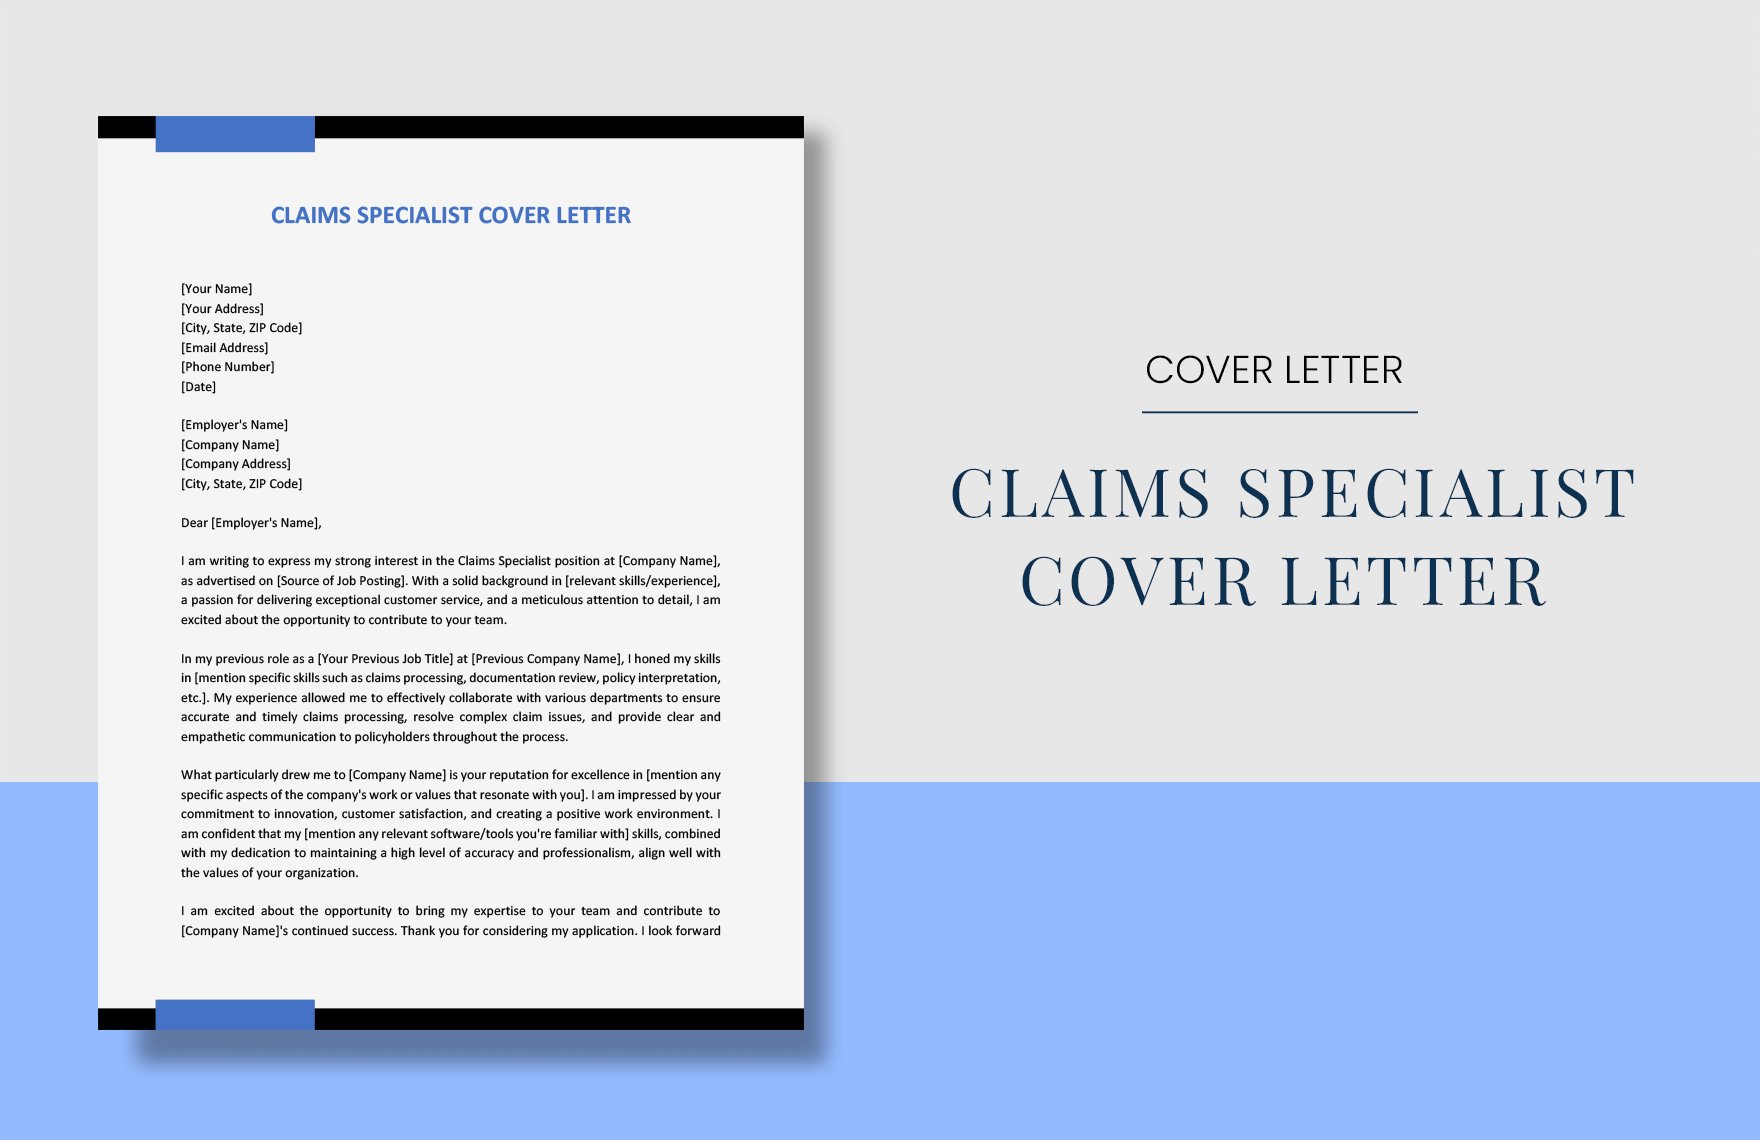 Claims Specialist Cover Letter` in Word, Google Docs, PDF